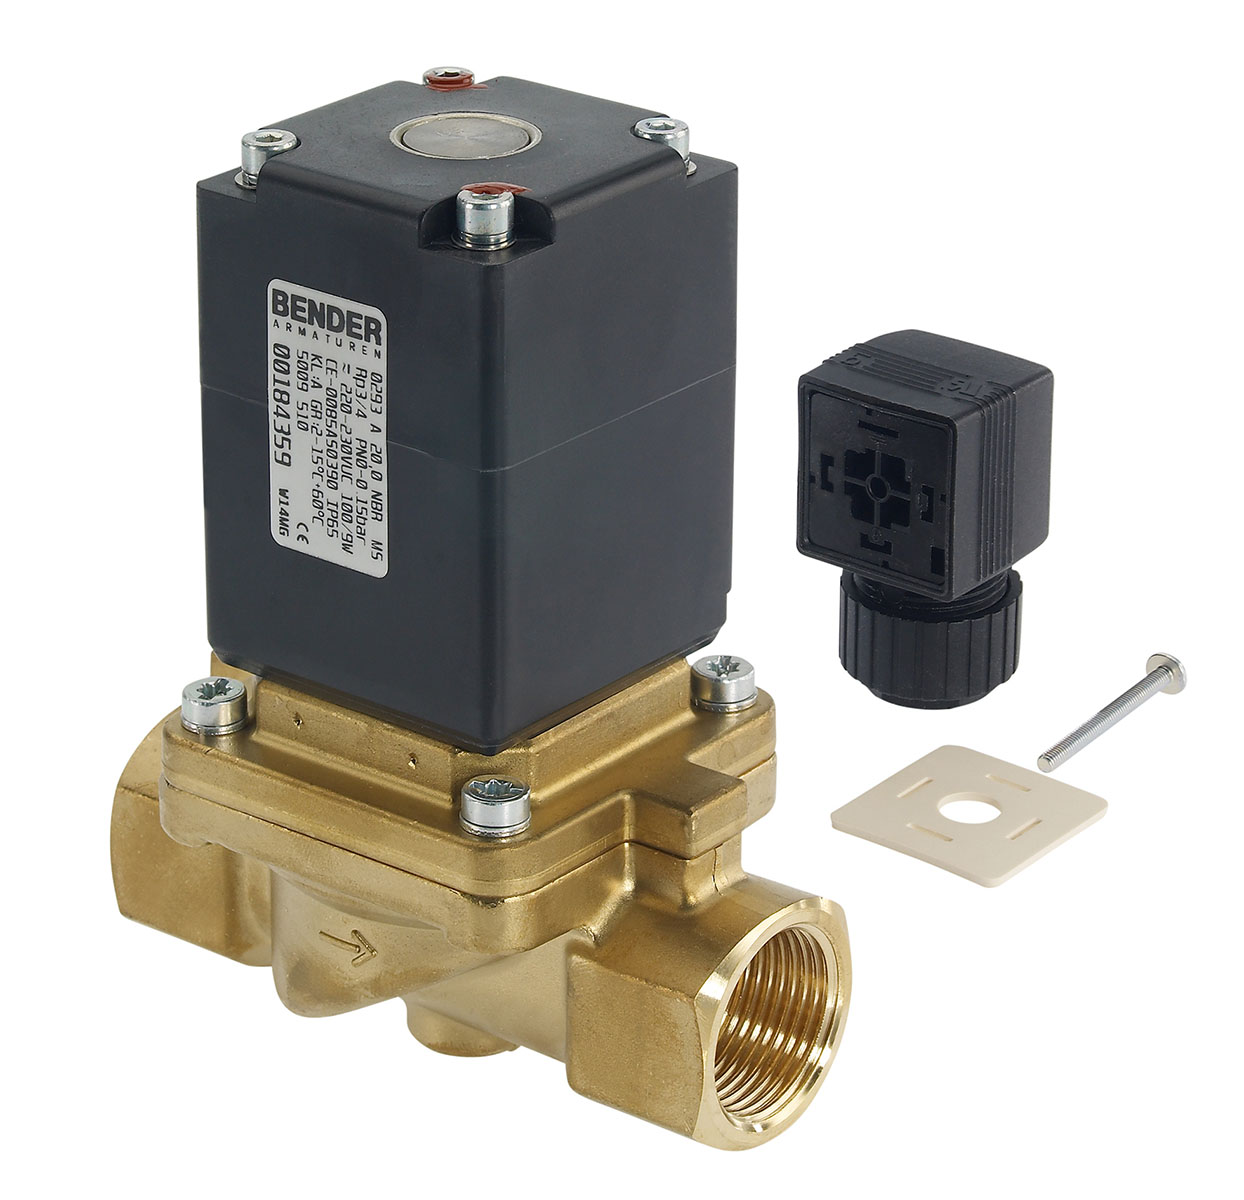 5009500 - 2/2 way solenoid valve normally closed for flammable gas, DIN-DVGW certified for gas Type 4; female thread